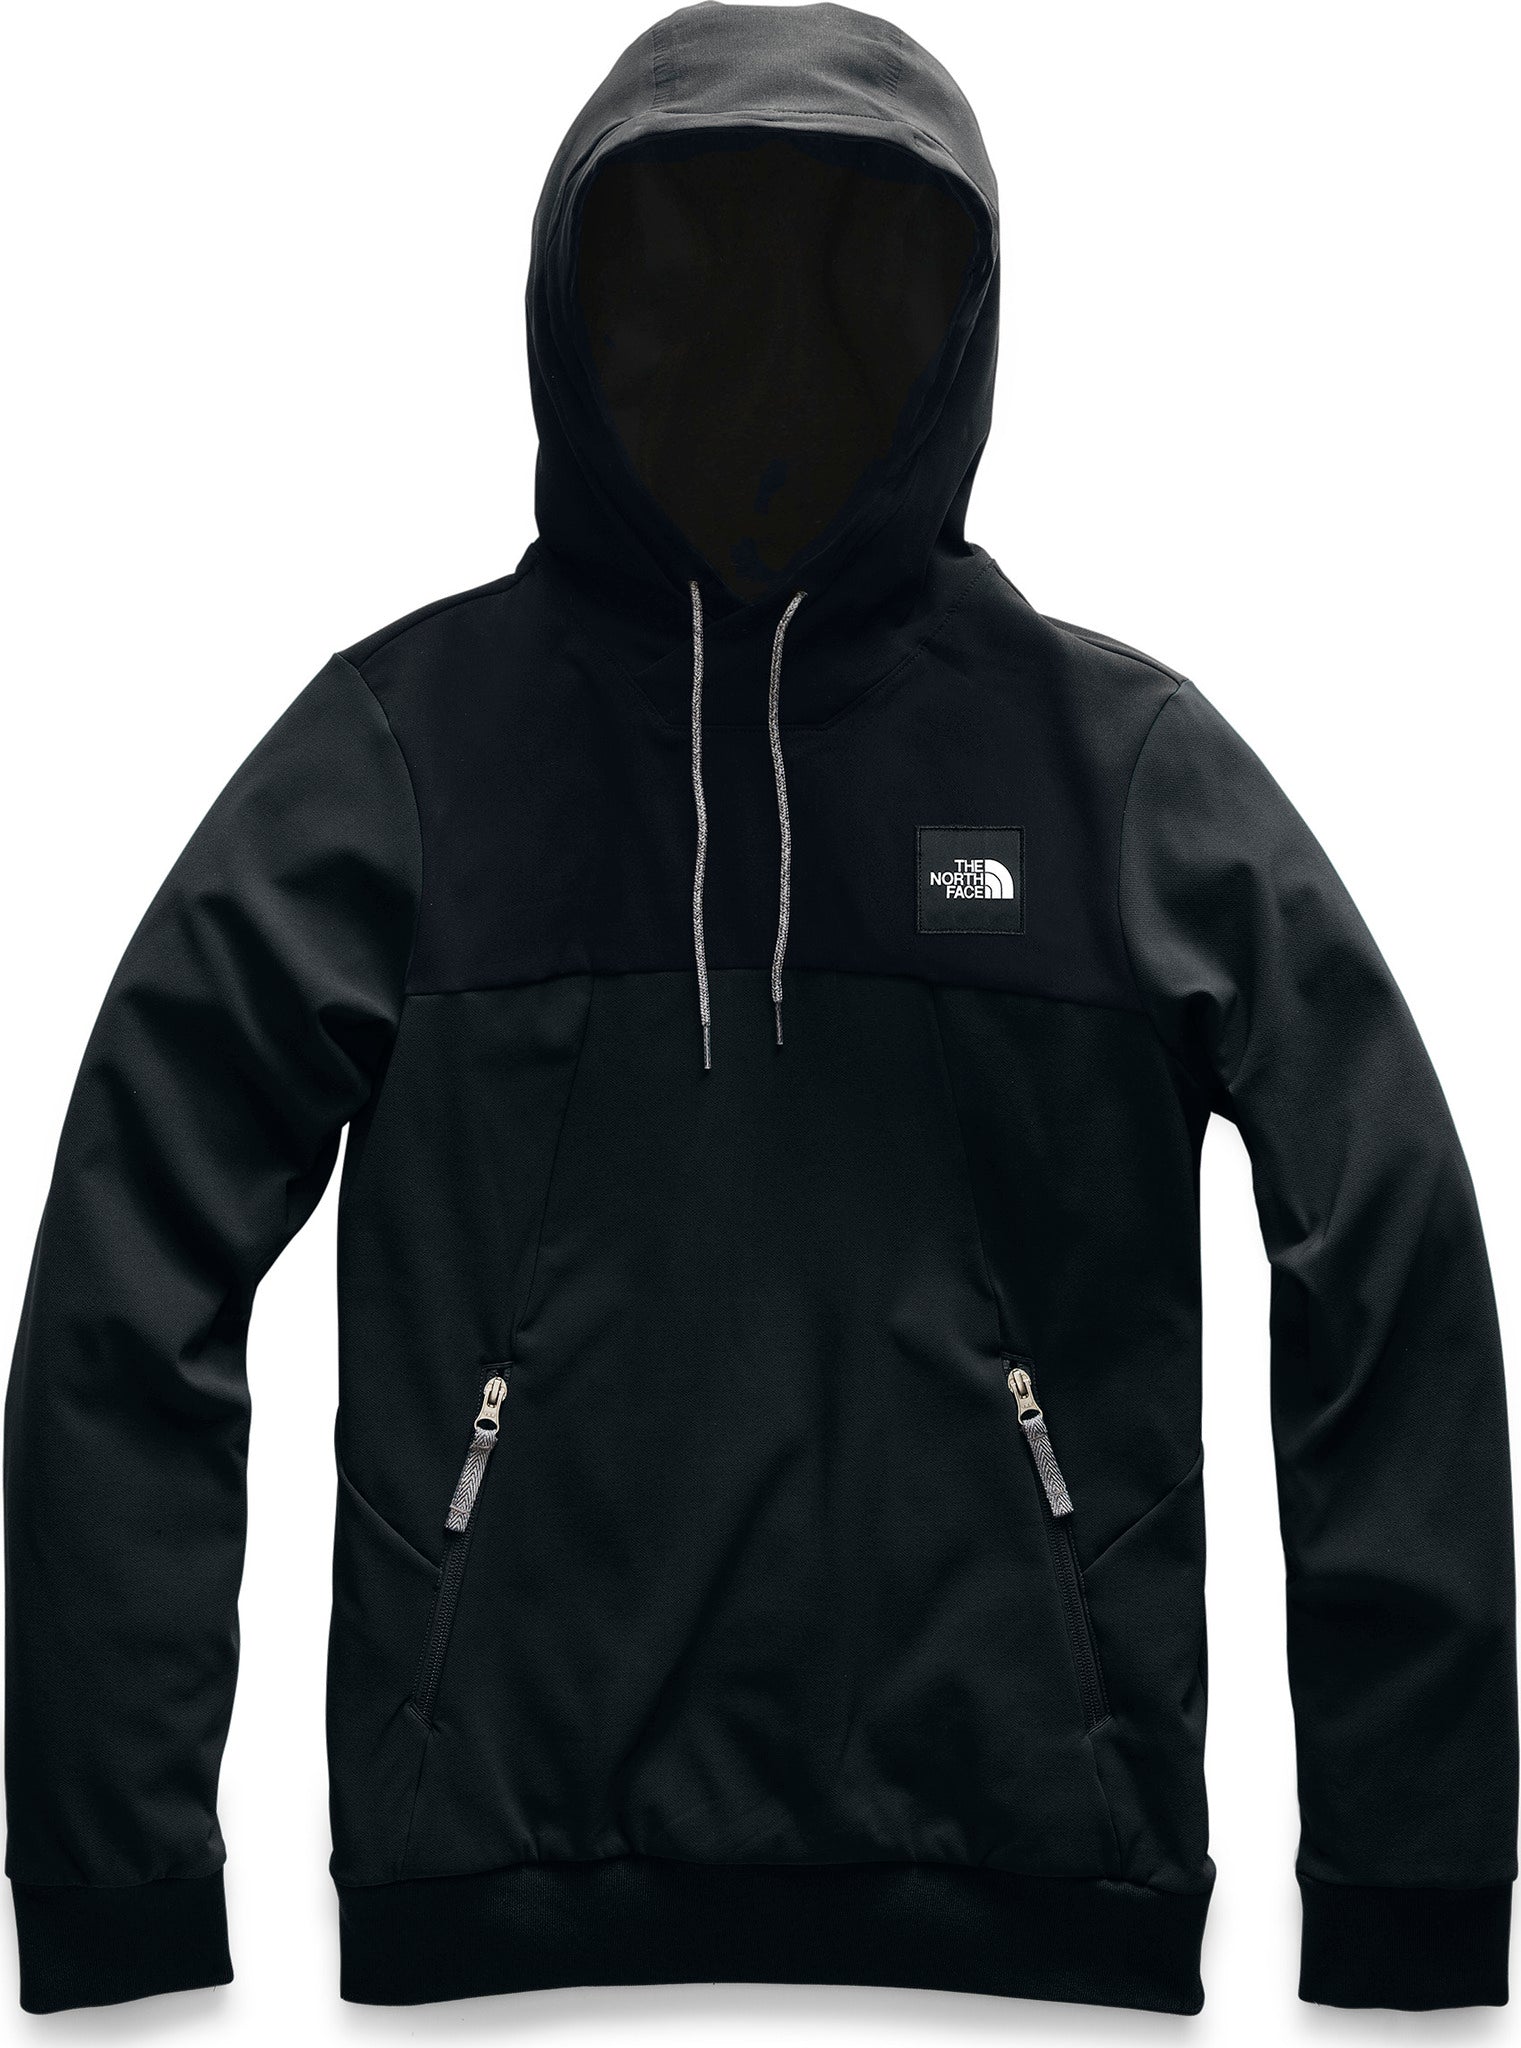 The North Face Tekno Hoodie Pullover - Women's | The Last Hunt